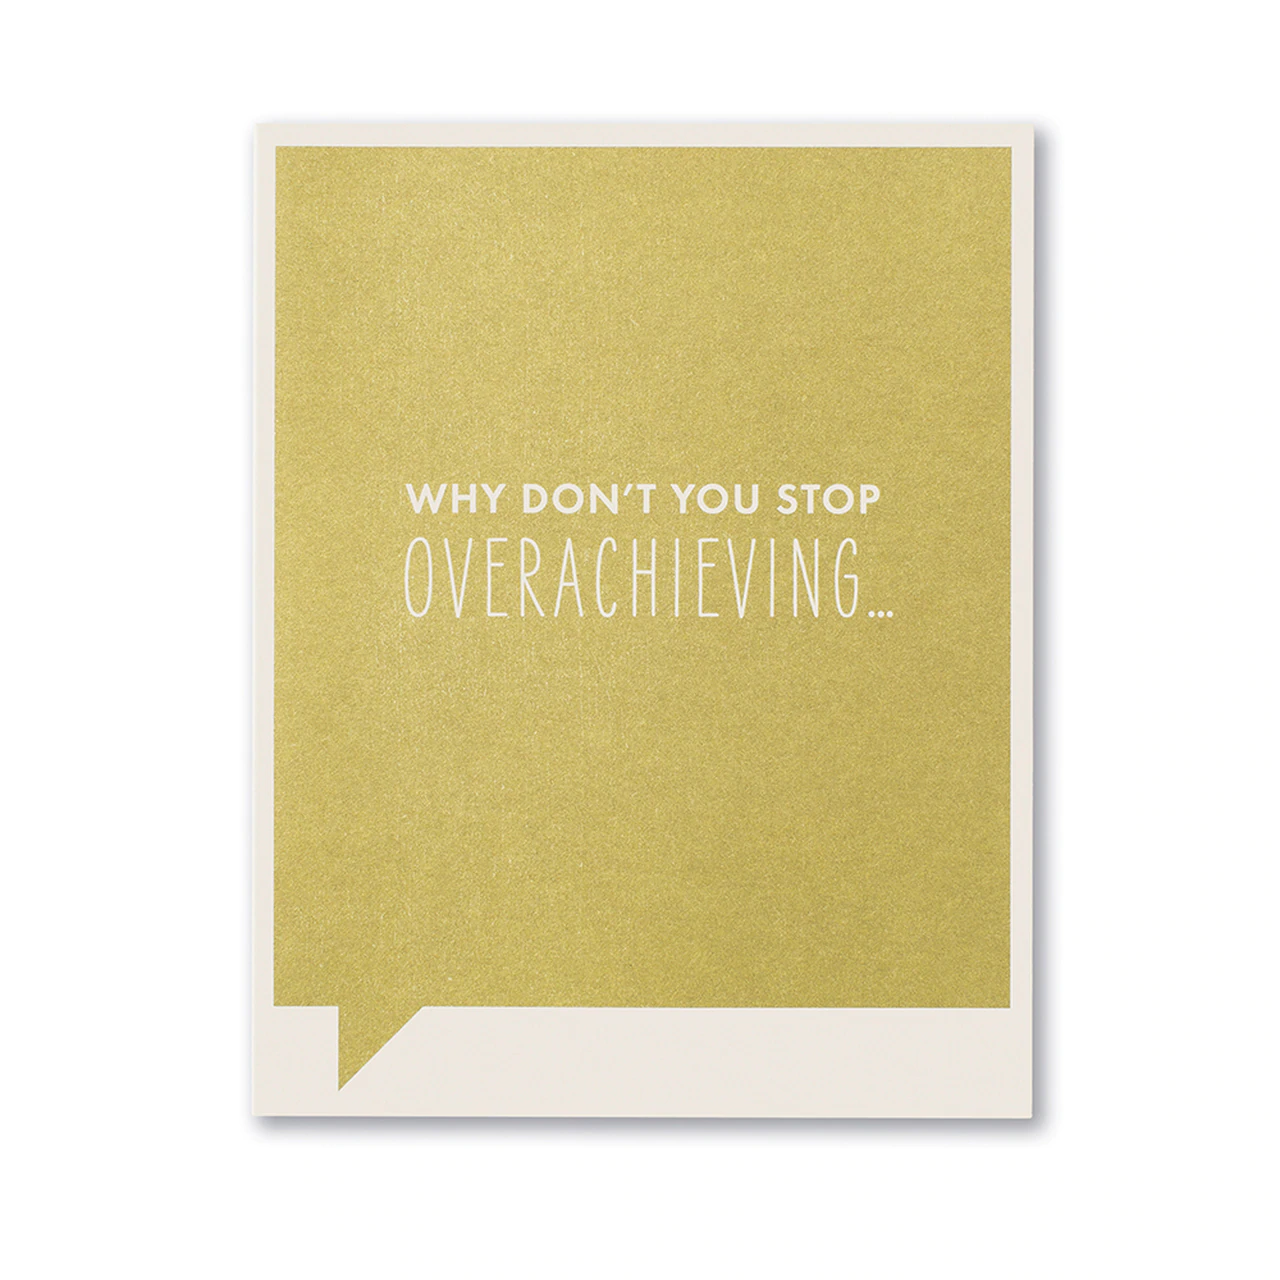 Congratulations Greeting Card - Why Don't You Stop Overachieving...